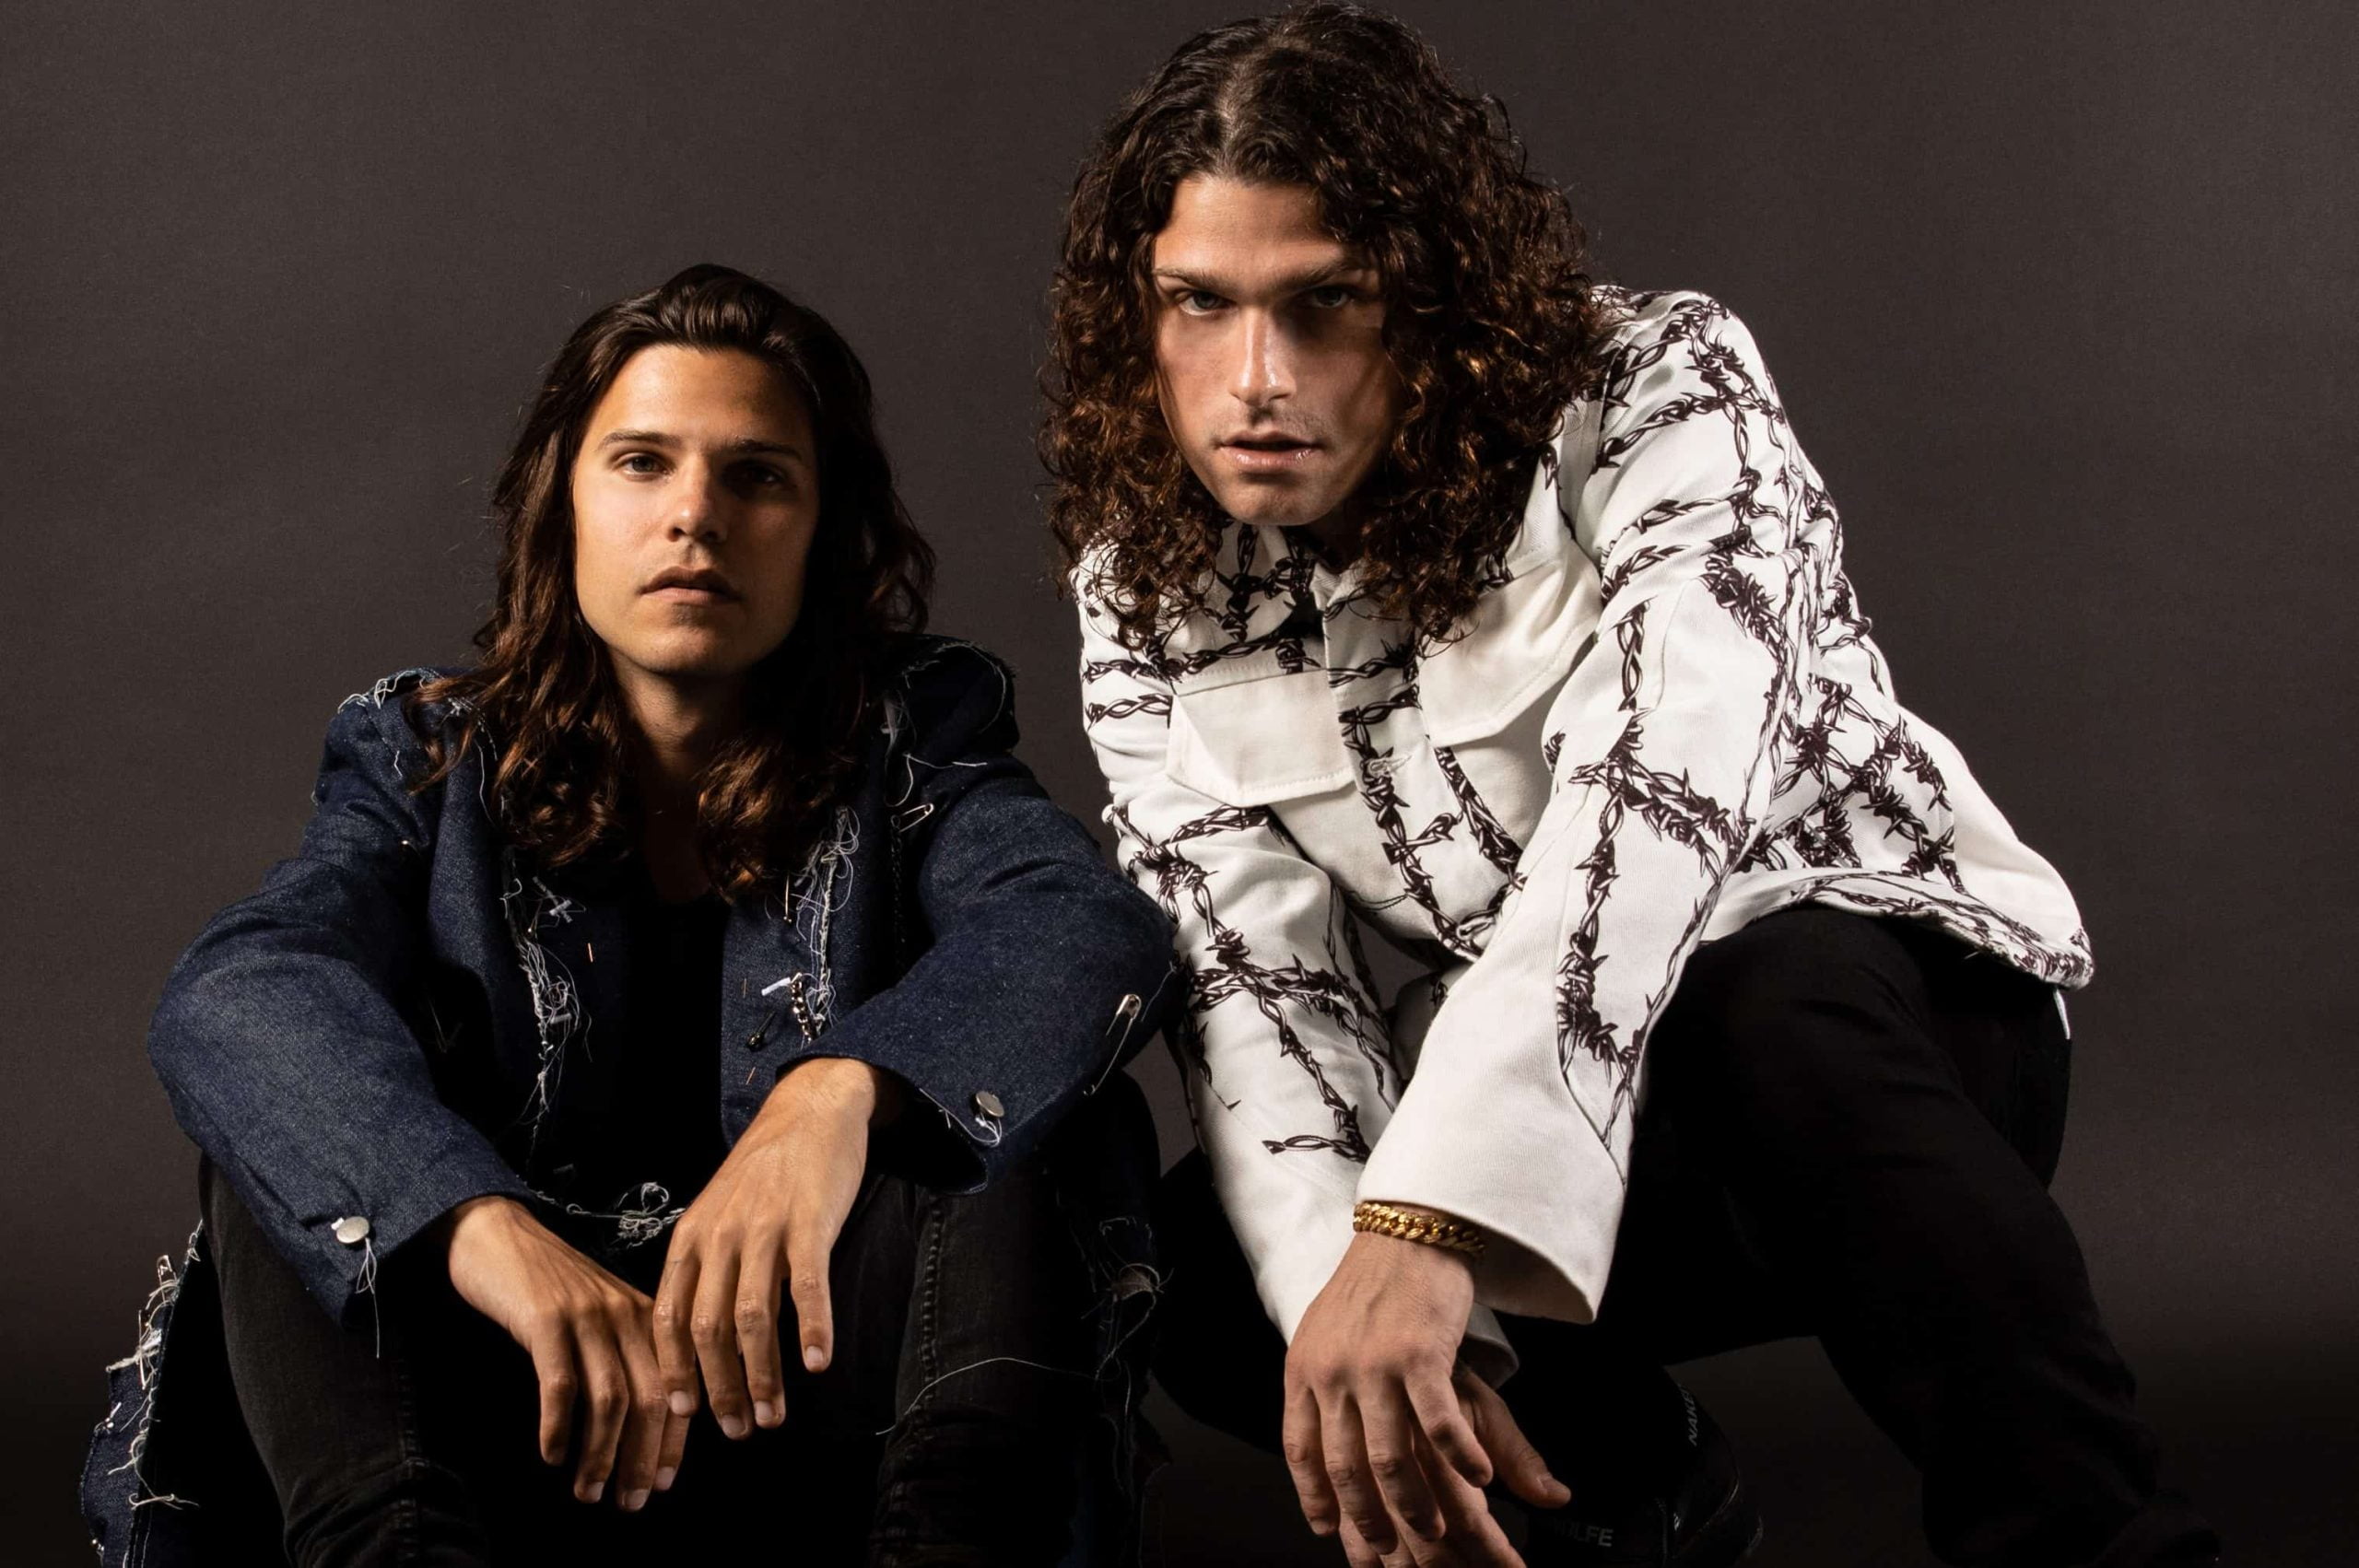 DVBBS return to the charts with ‘West Coast’ featuring Quinn XCII: Listen